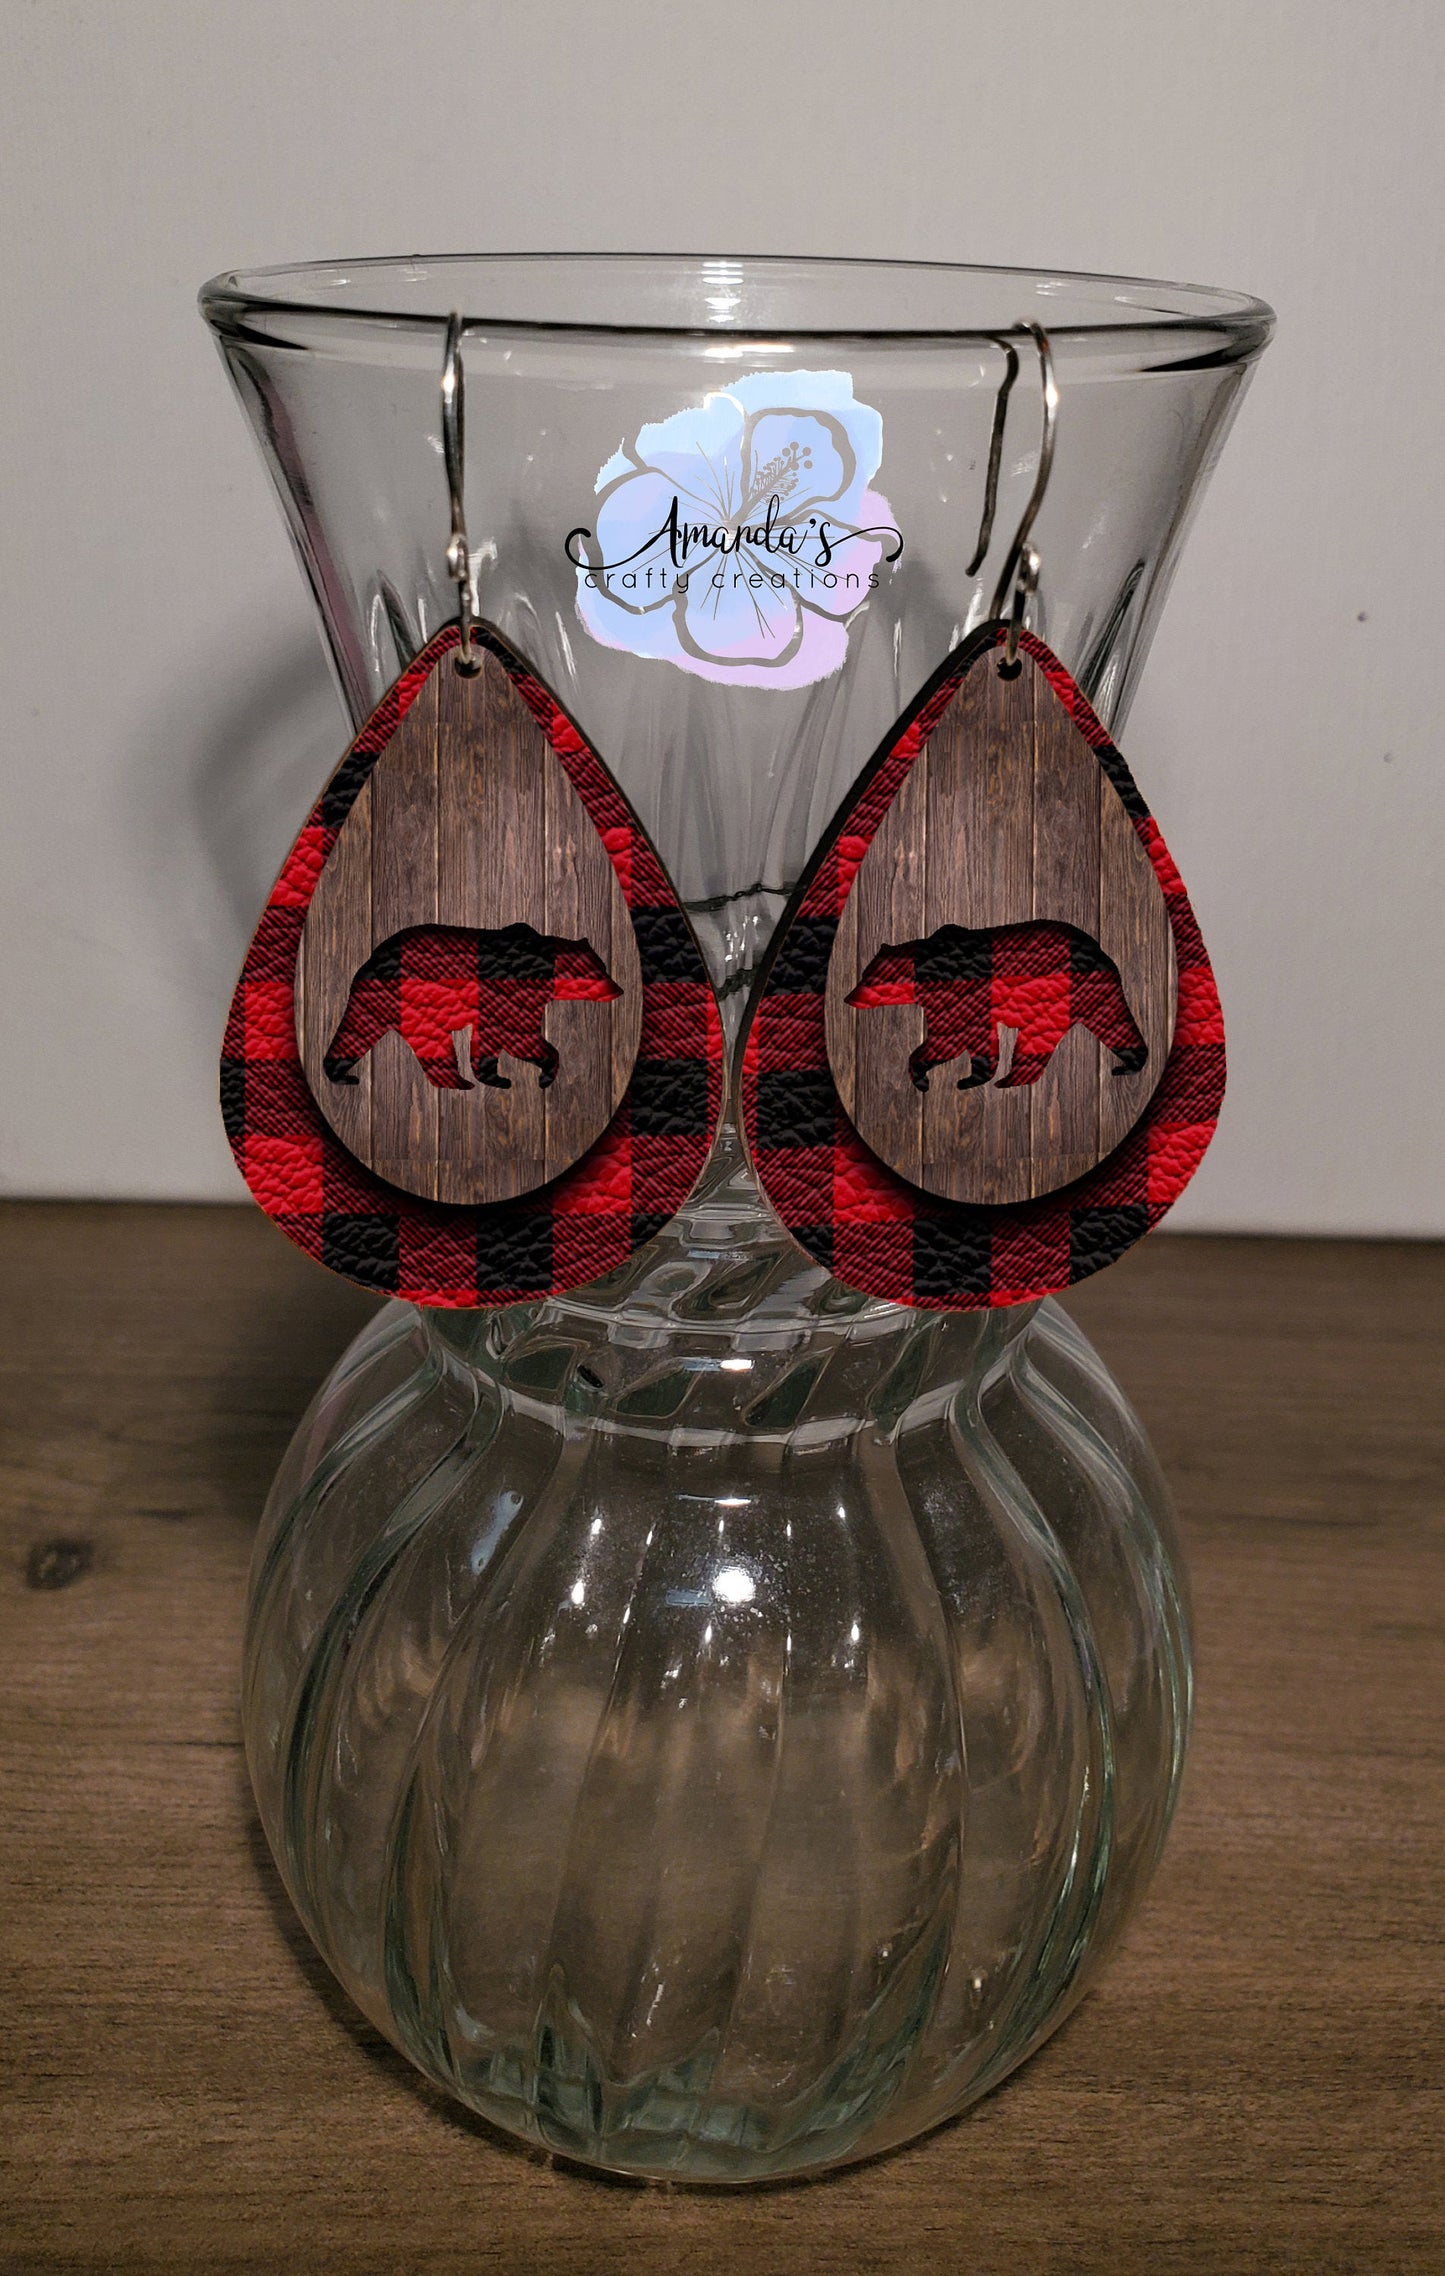 Drop Earrings, red and black buffalo plaid with bears